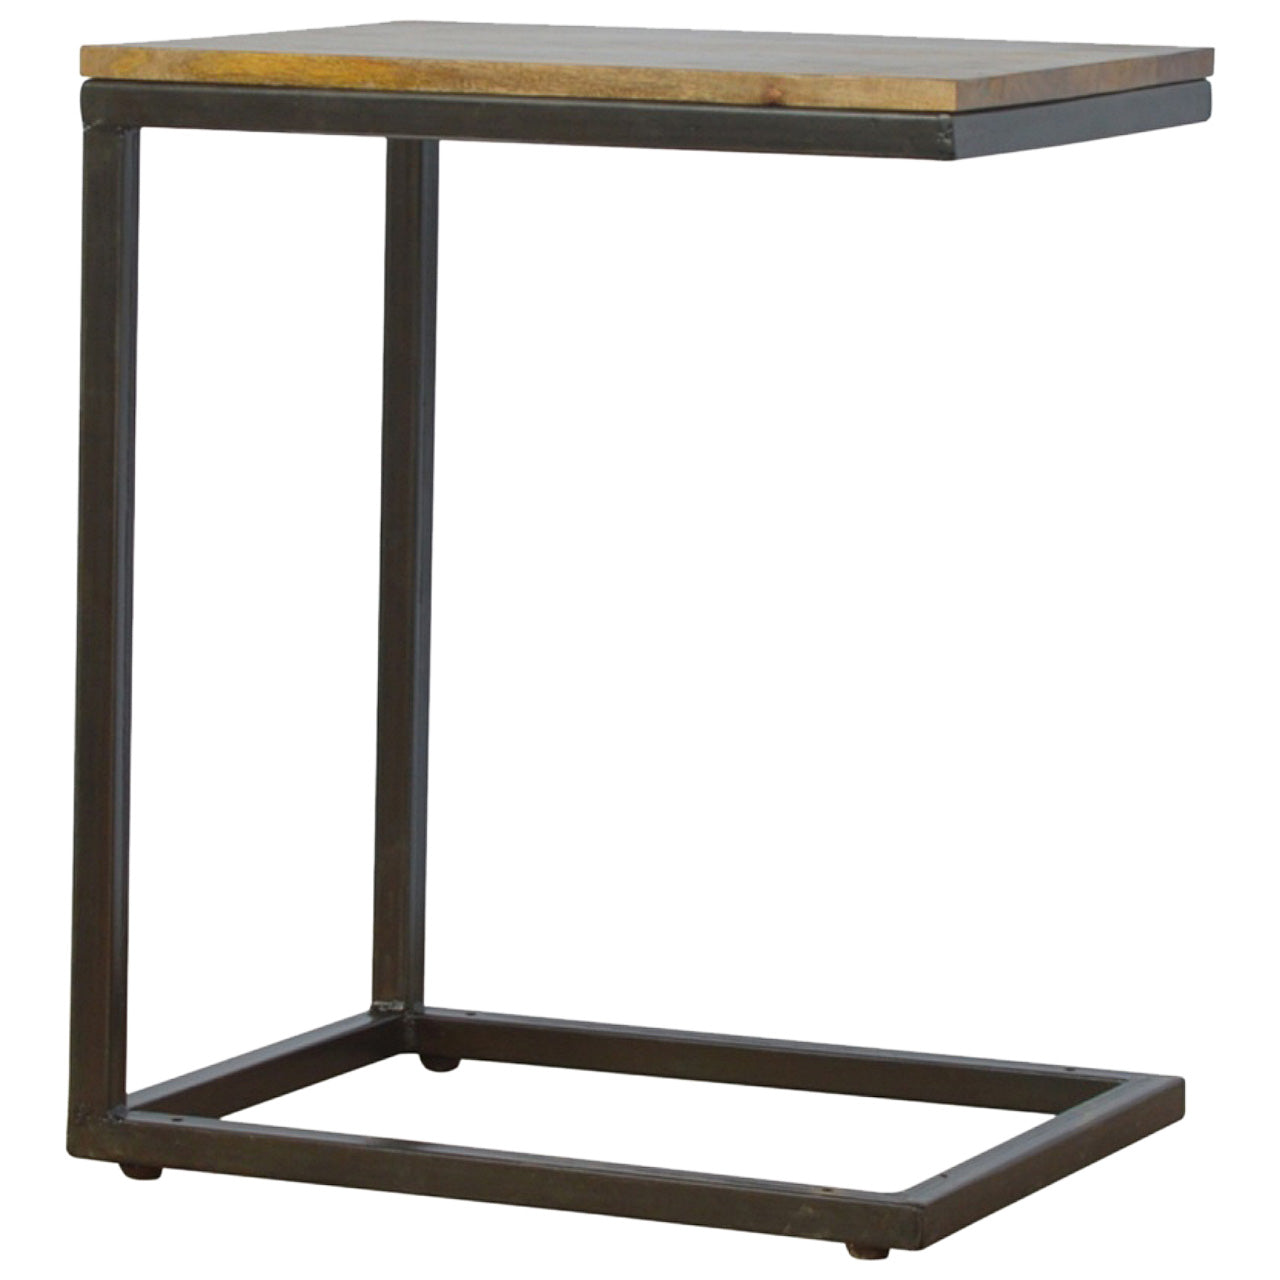 View Industrial Small End Table information